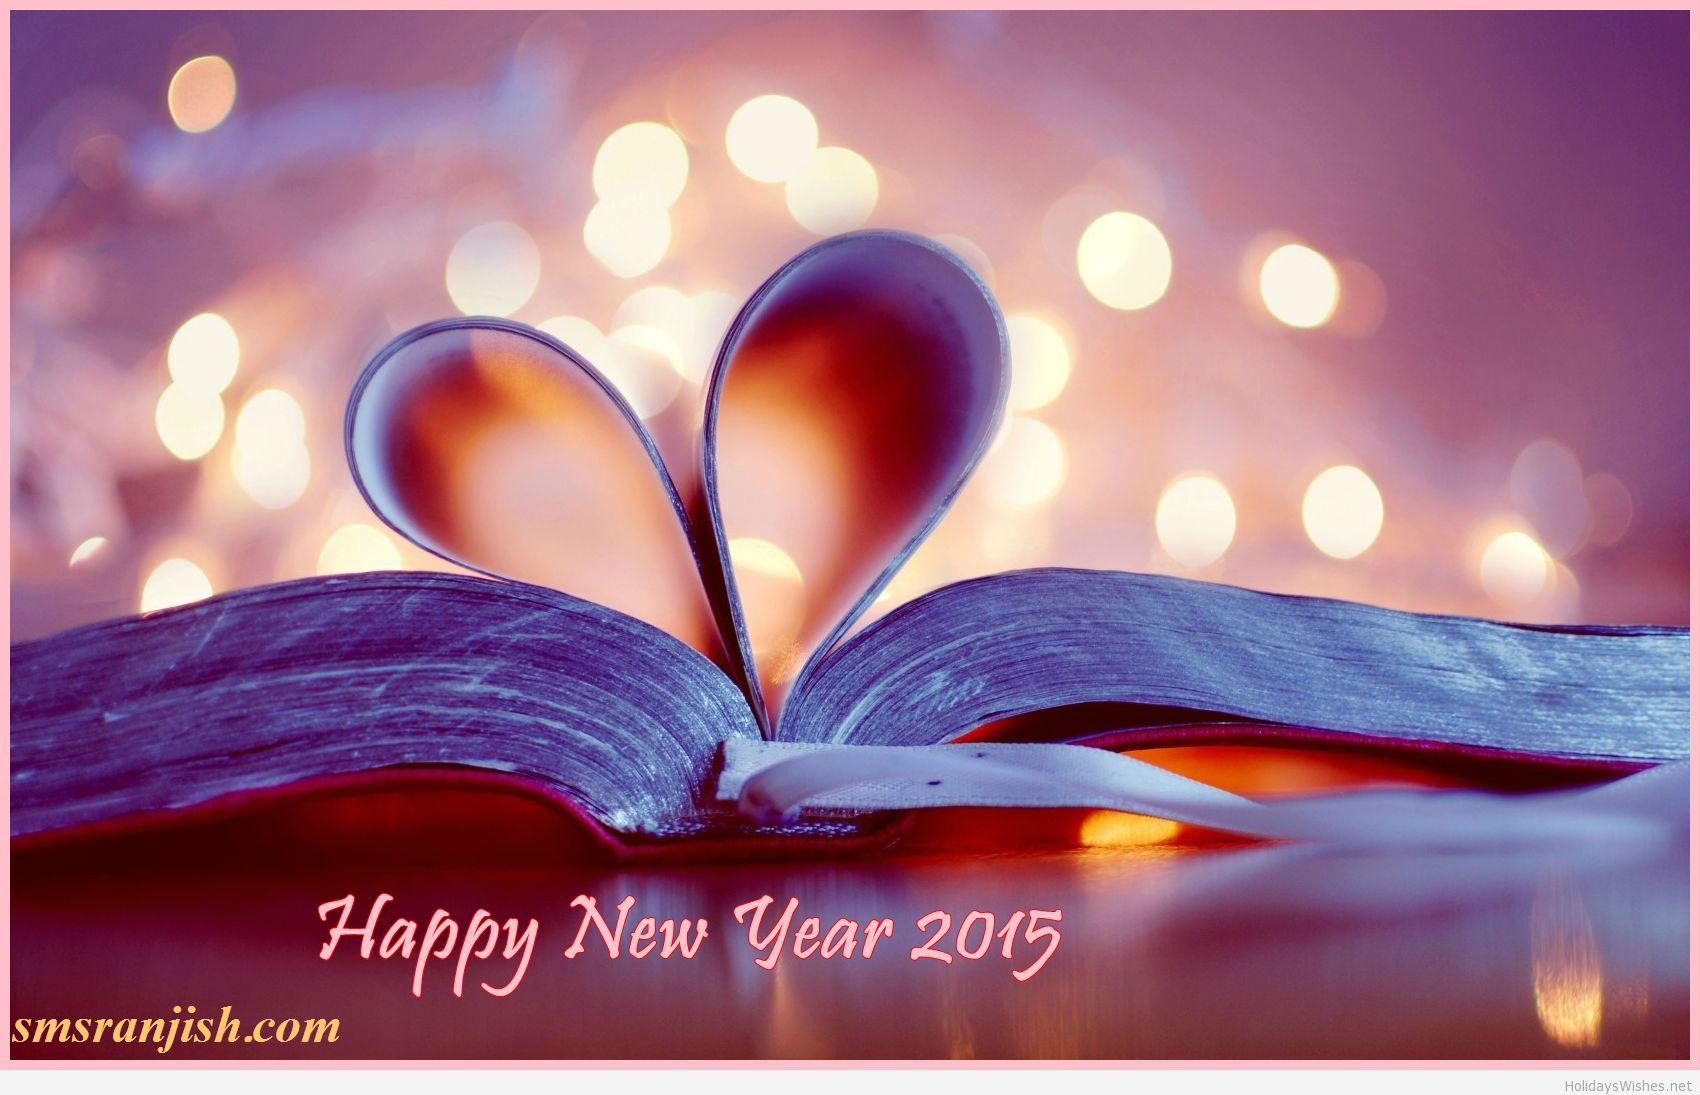 Happy New Year Sms Image Wallpaper With